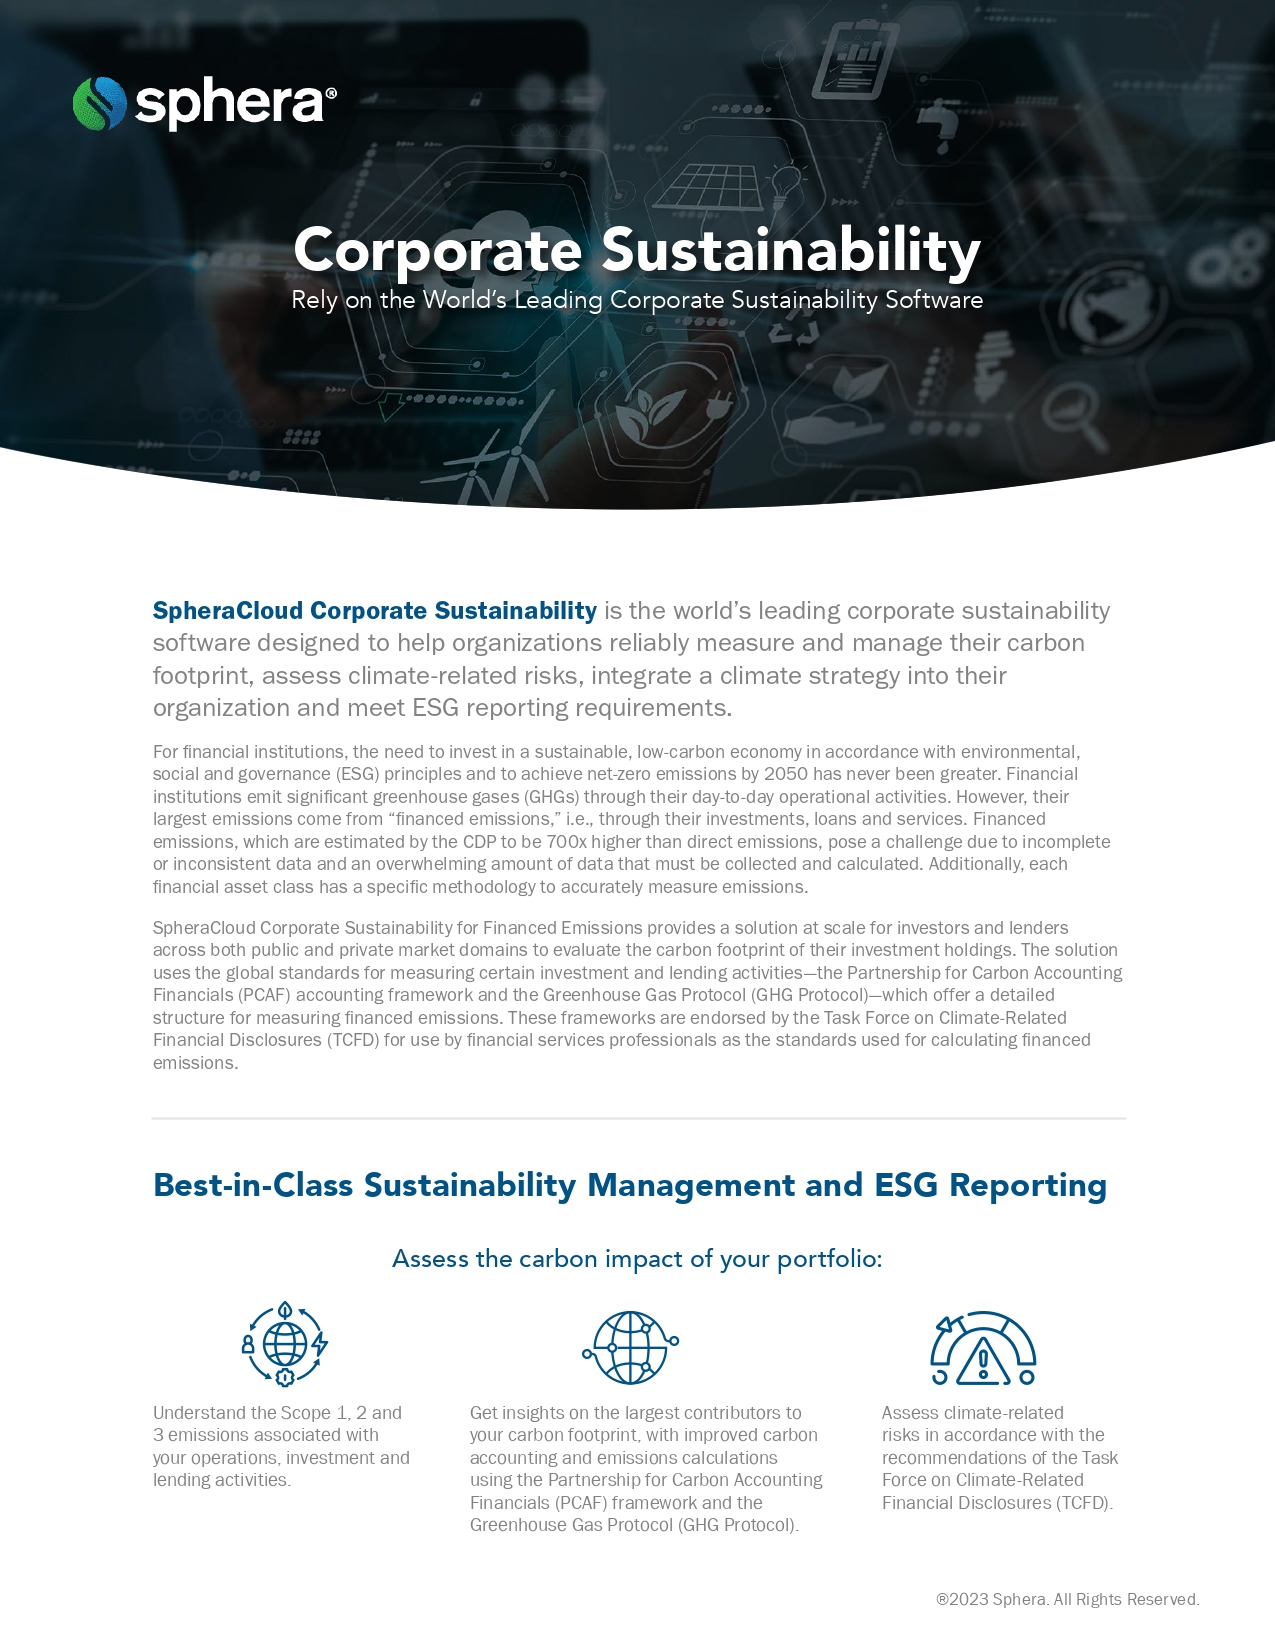 Corporate Sustainability for Financed Emissions